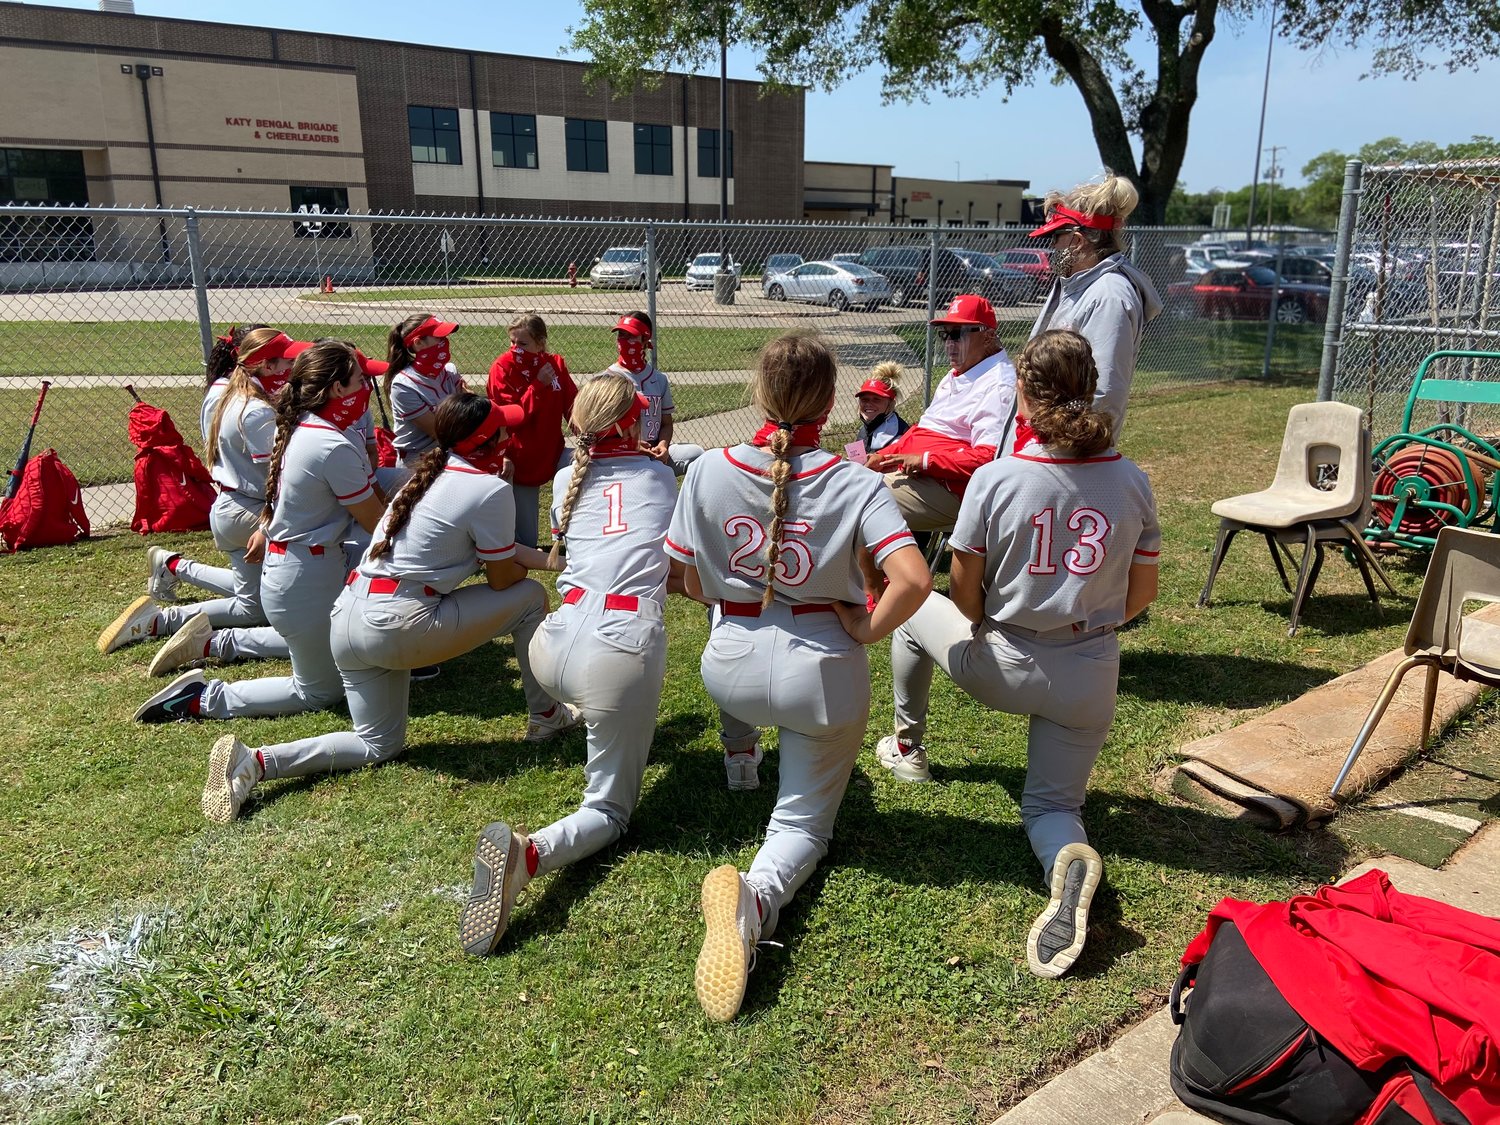 Katy High softball coach Kalum Haack, sitting in the middle, talks to his team Saturday, April 10, after its 9-0 win over Taylor that secured the program’s sixth straight outright district championship.